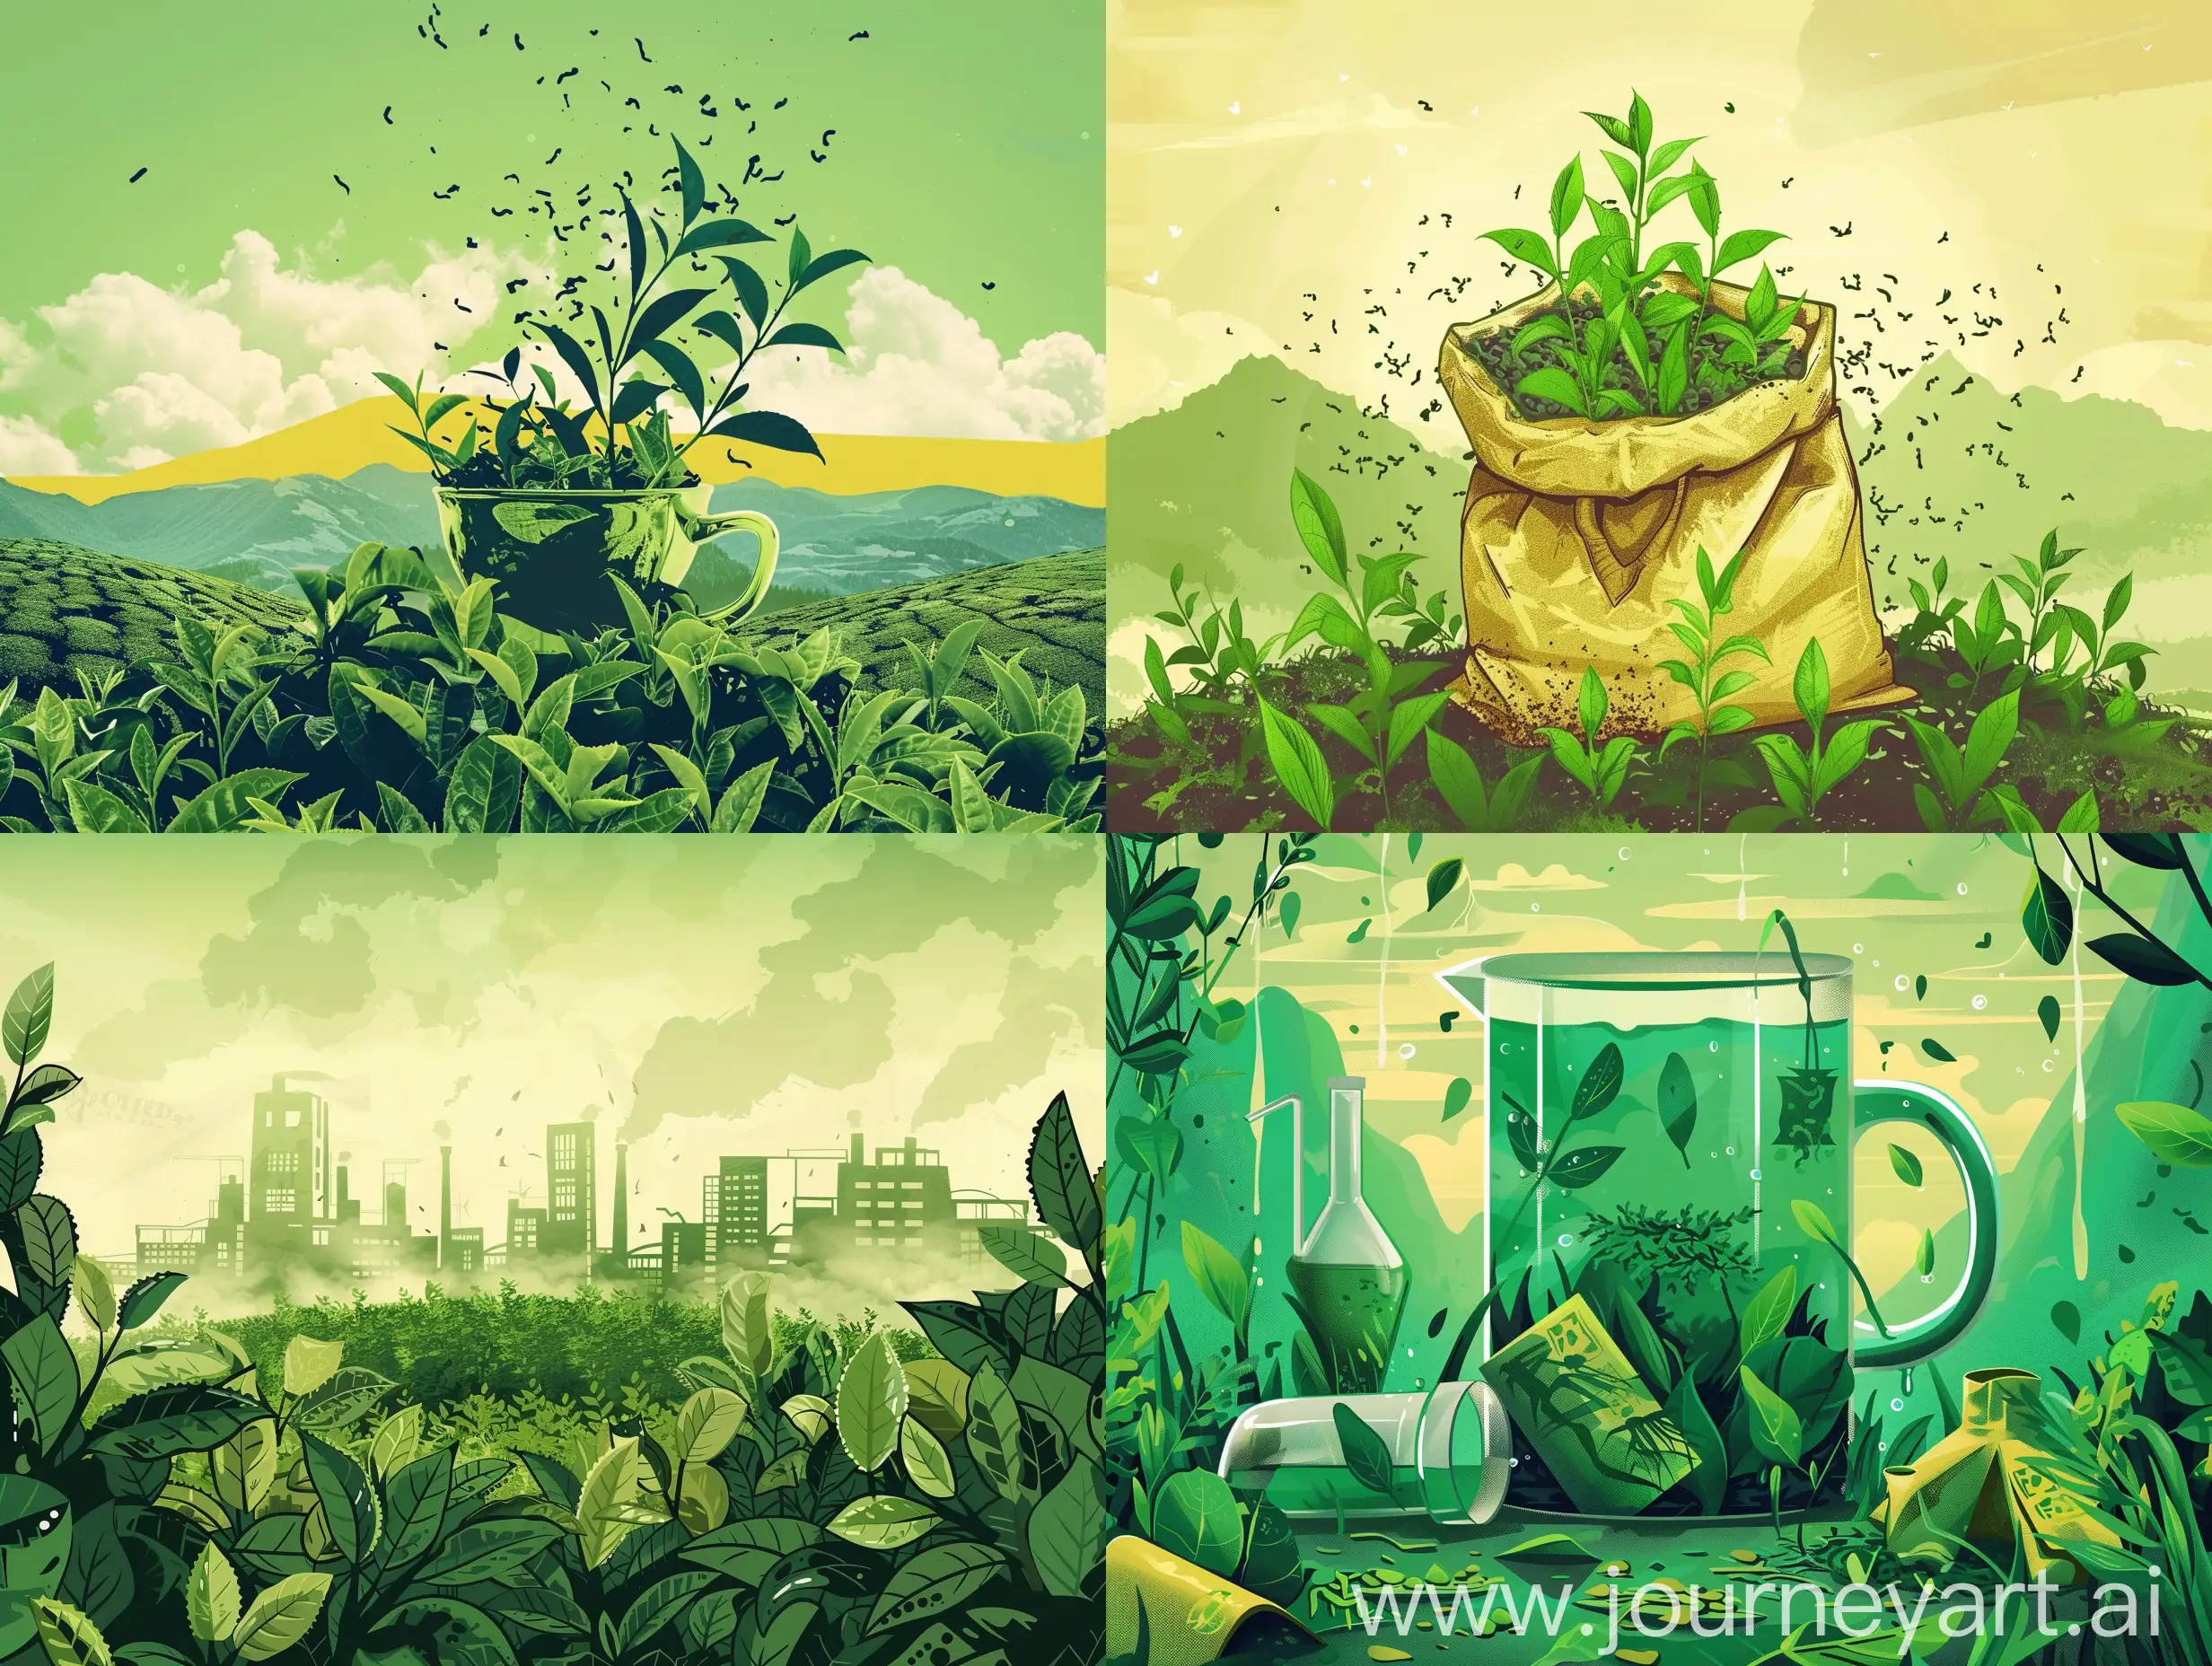 Satirical-Poster-Consequences-of-Green-Tea-Industry-on-the-Environment